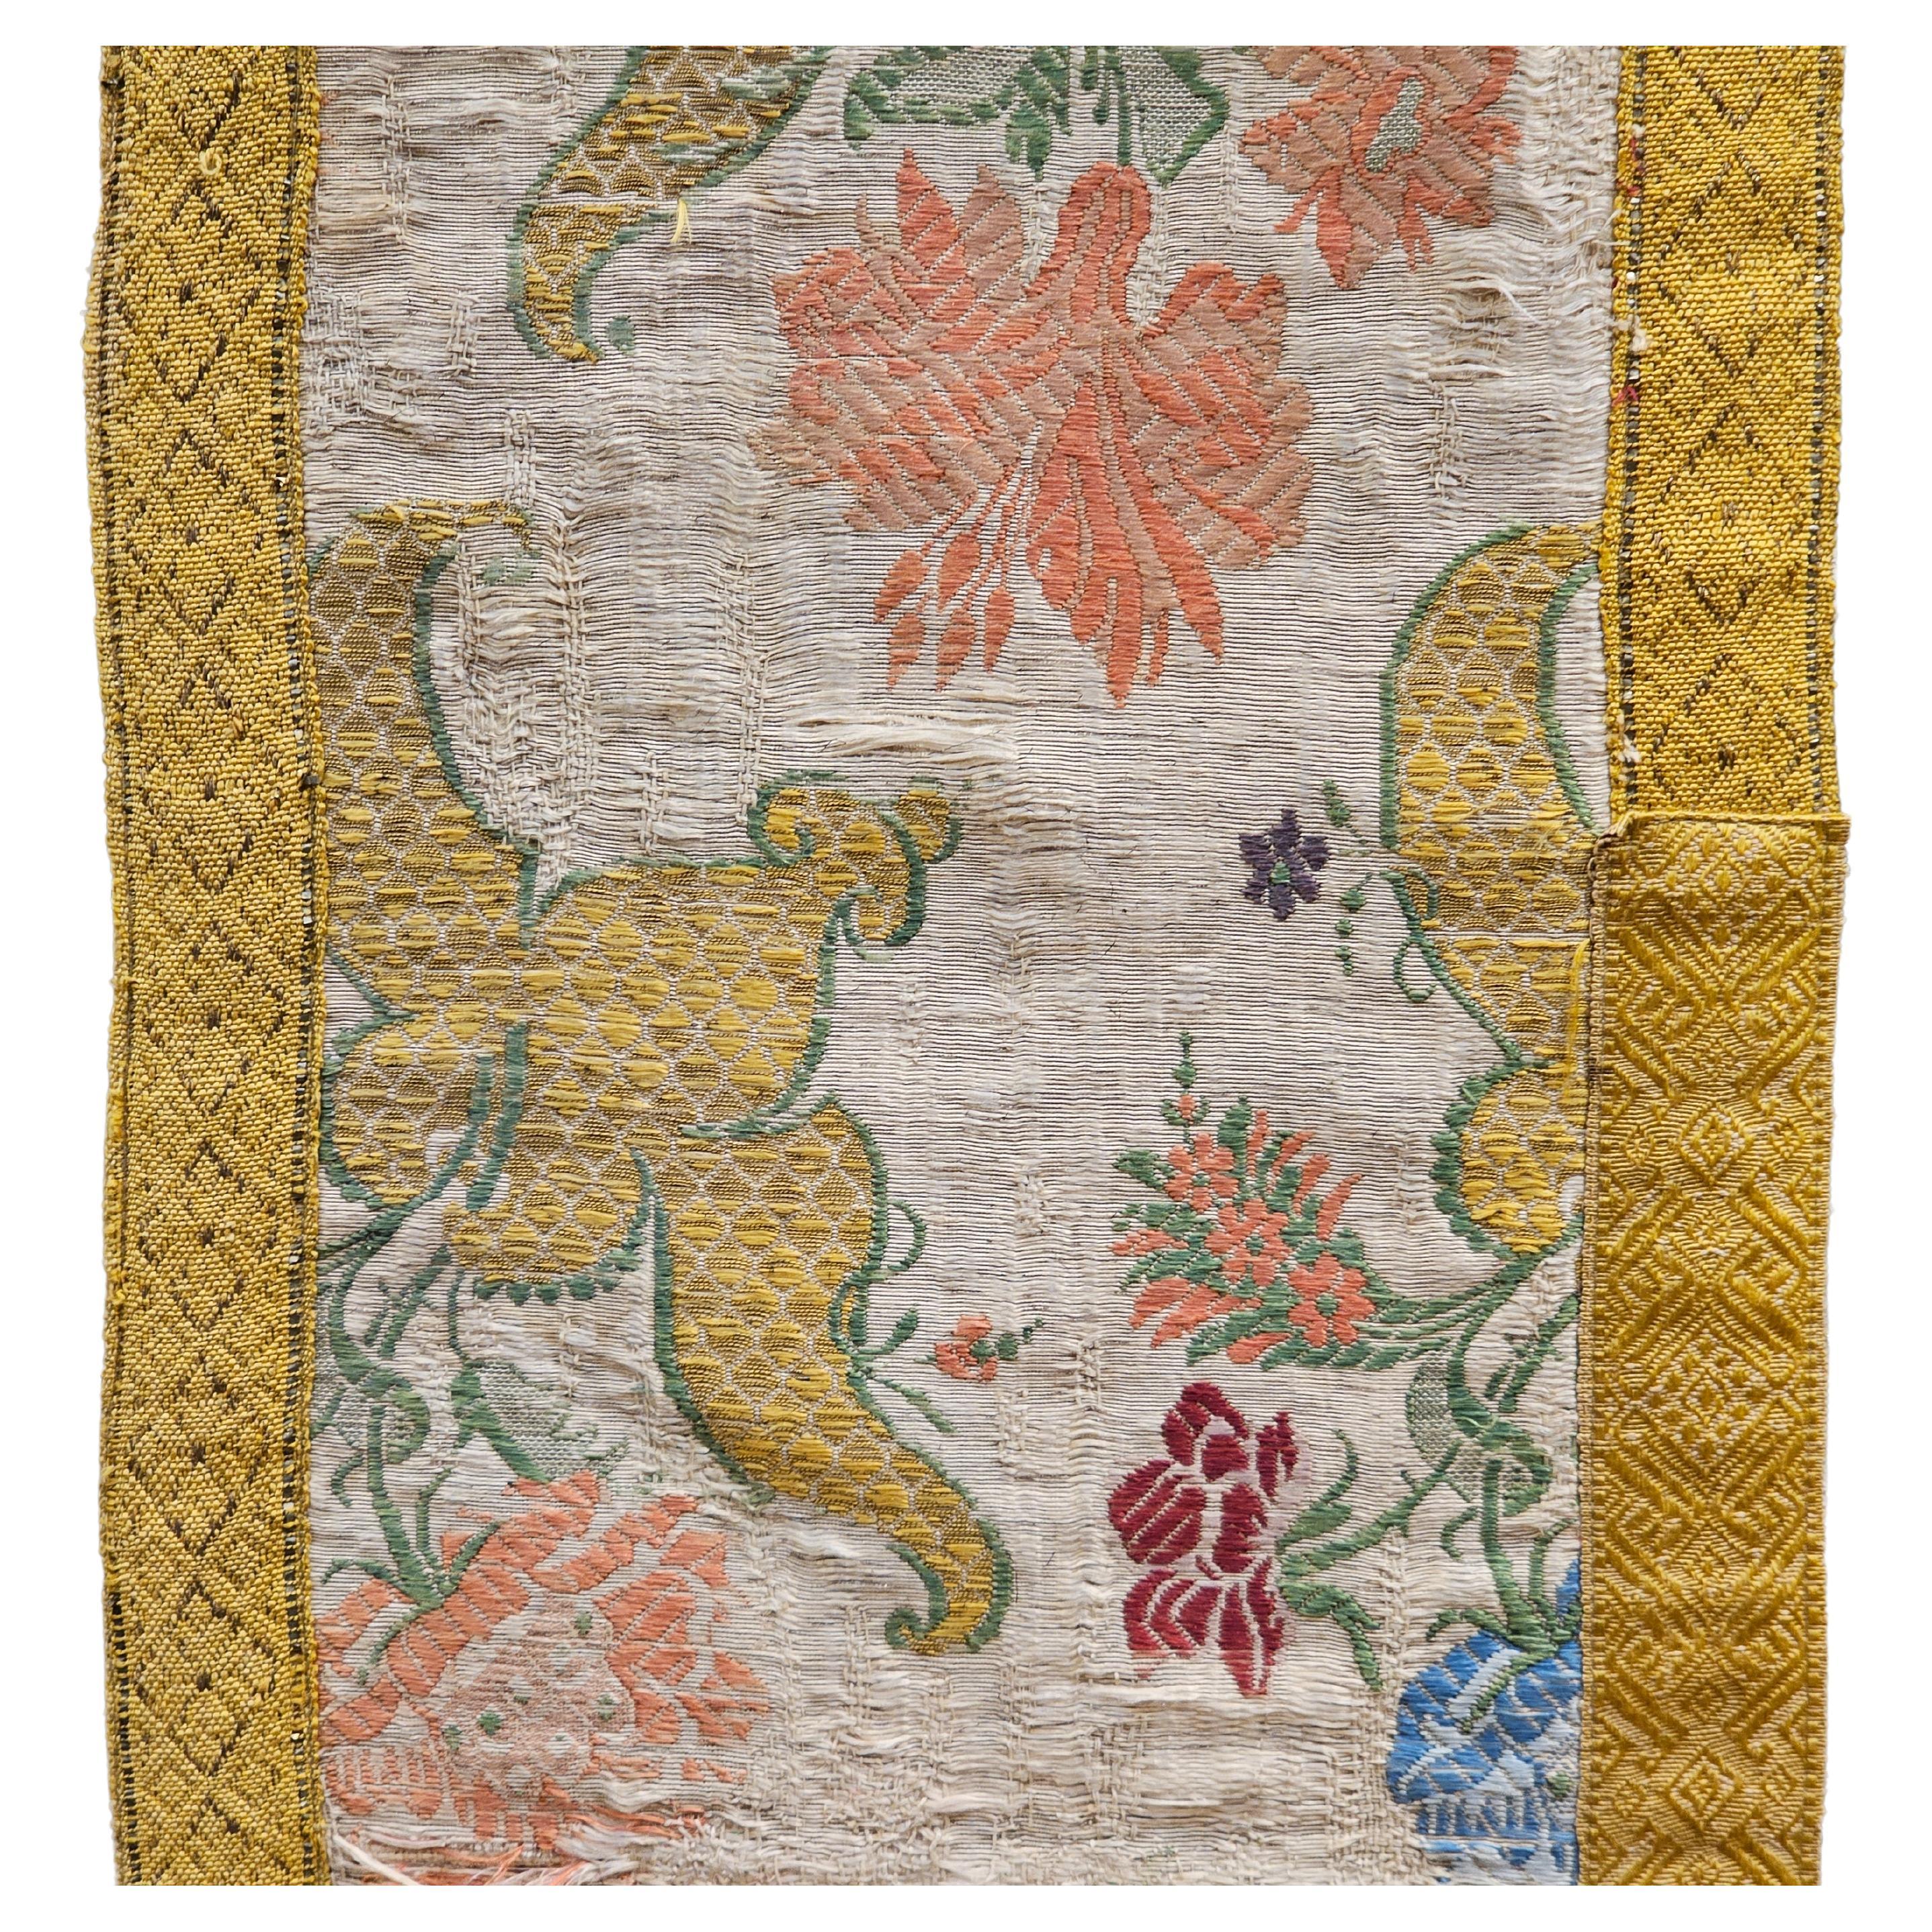 18th Century European Hand Embroidered Silk and Gilt Threads Textile Panel